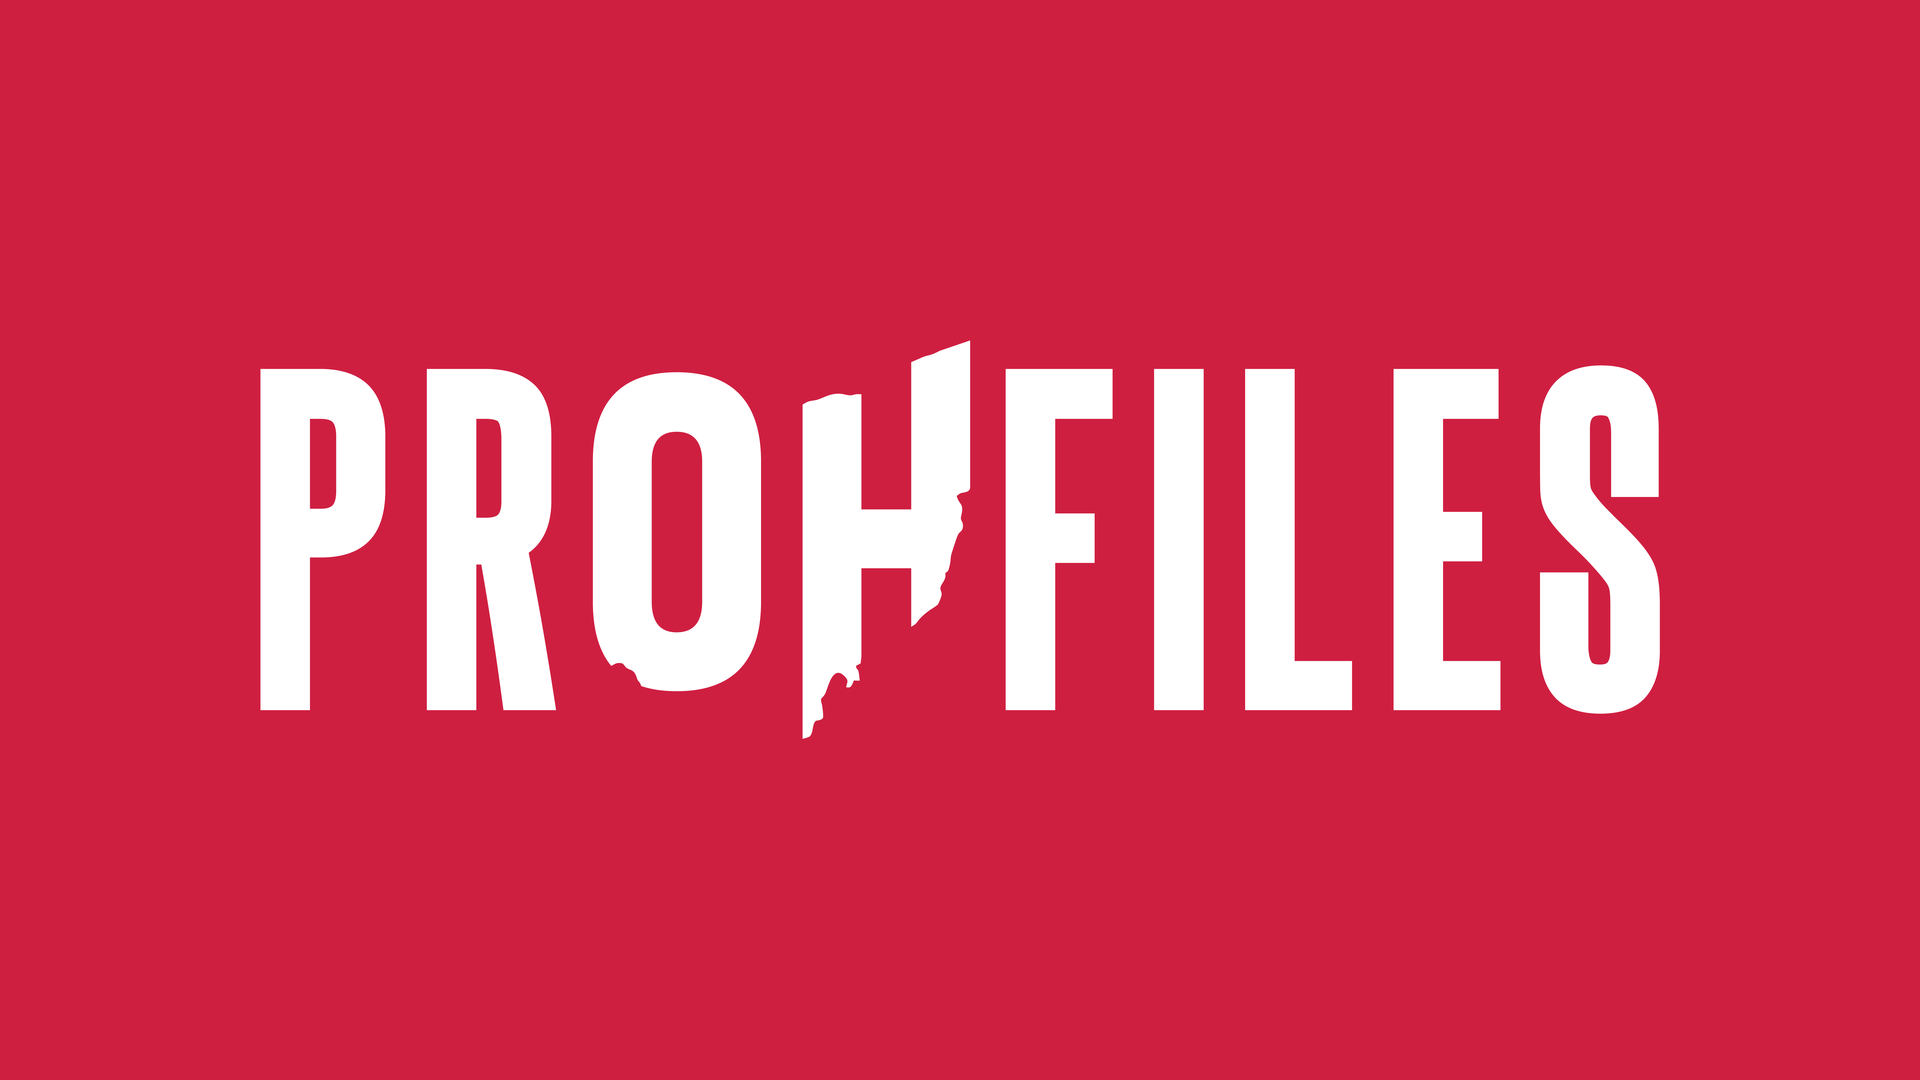 The PROHFILES podcast logo: white text on a red background, with the "OH" shaped like Ohio